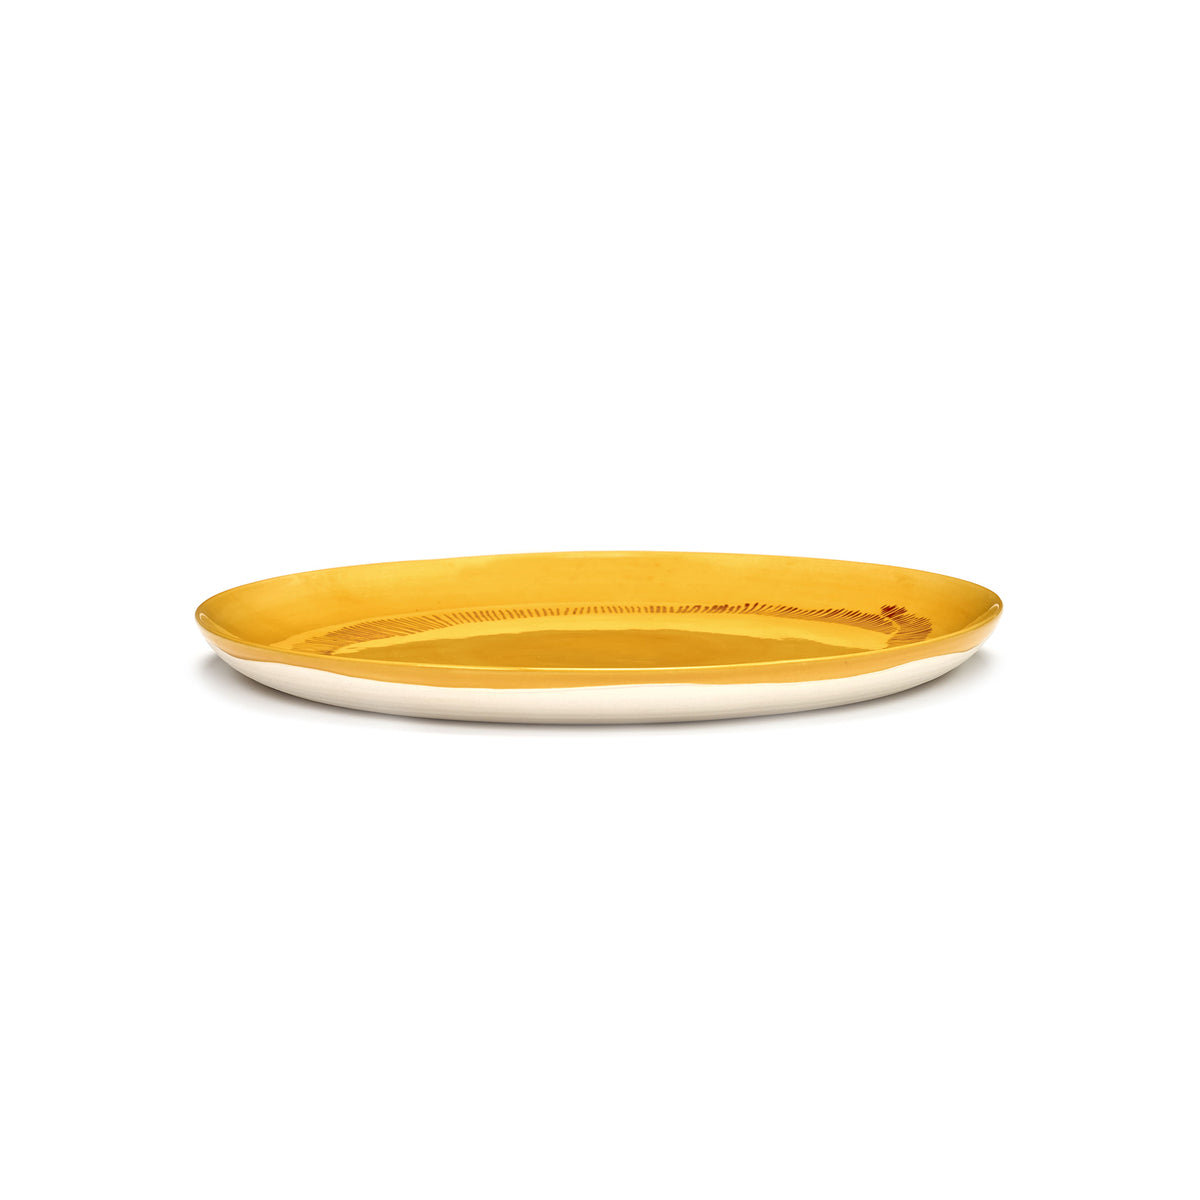 Sunny Yellow Plate with Red Stripes - S